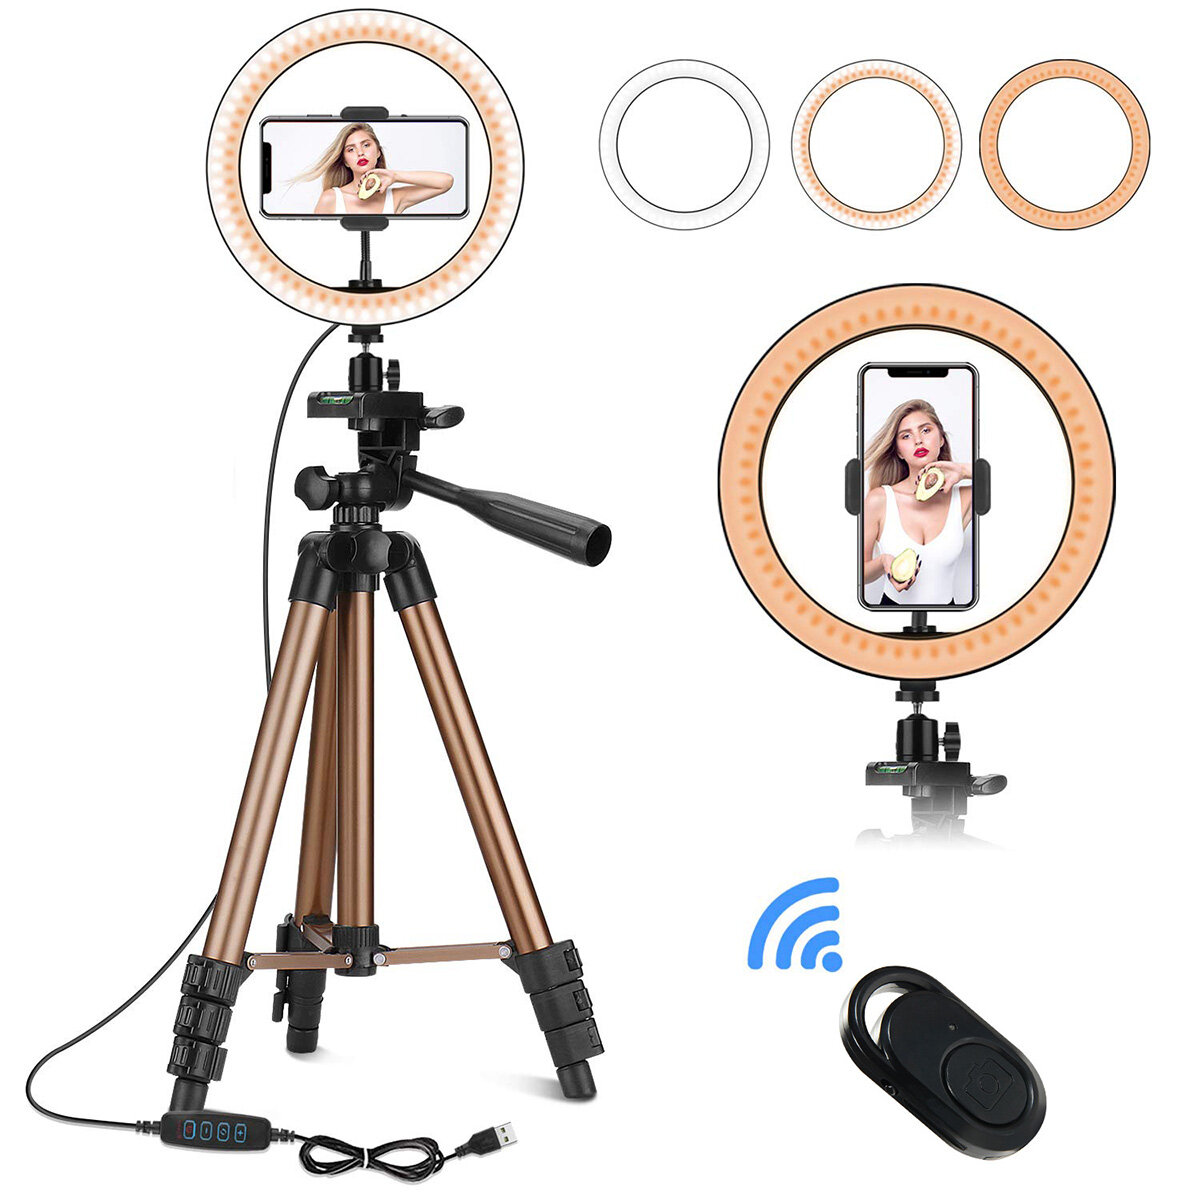 Image of Controllable 6 inch 10 inch LED Selfie Ring Light + Tripod Stand + Phone Holder Photography YouTube Video Makeup Live St